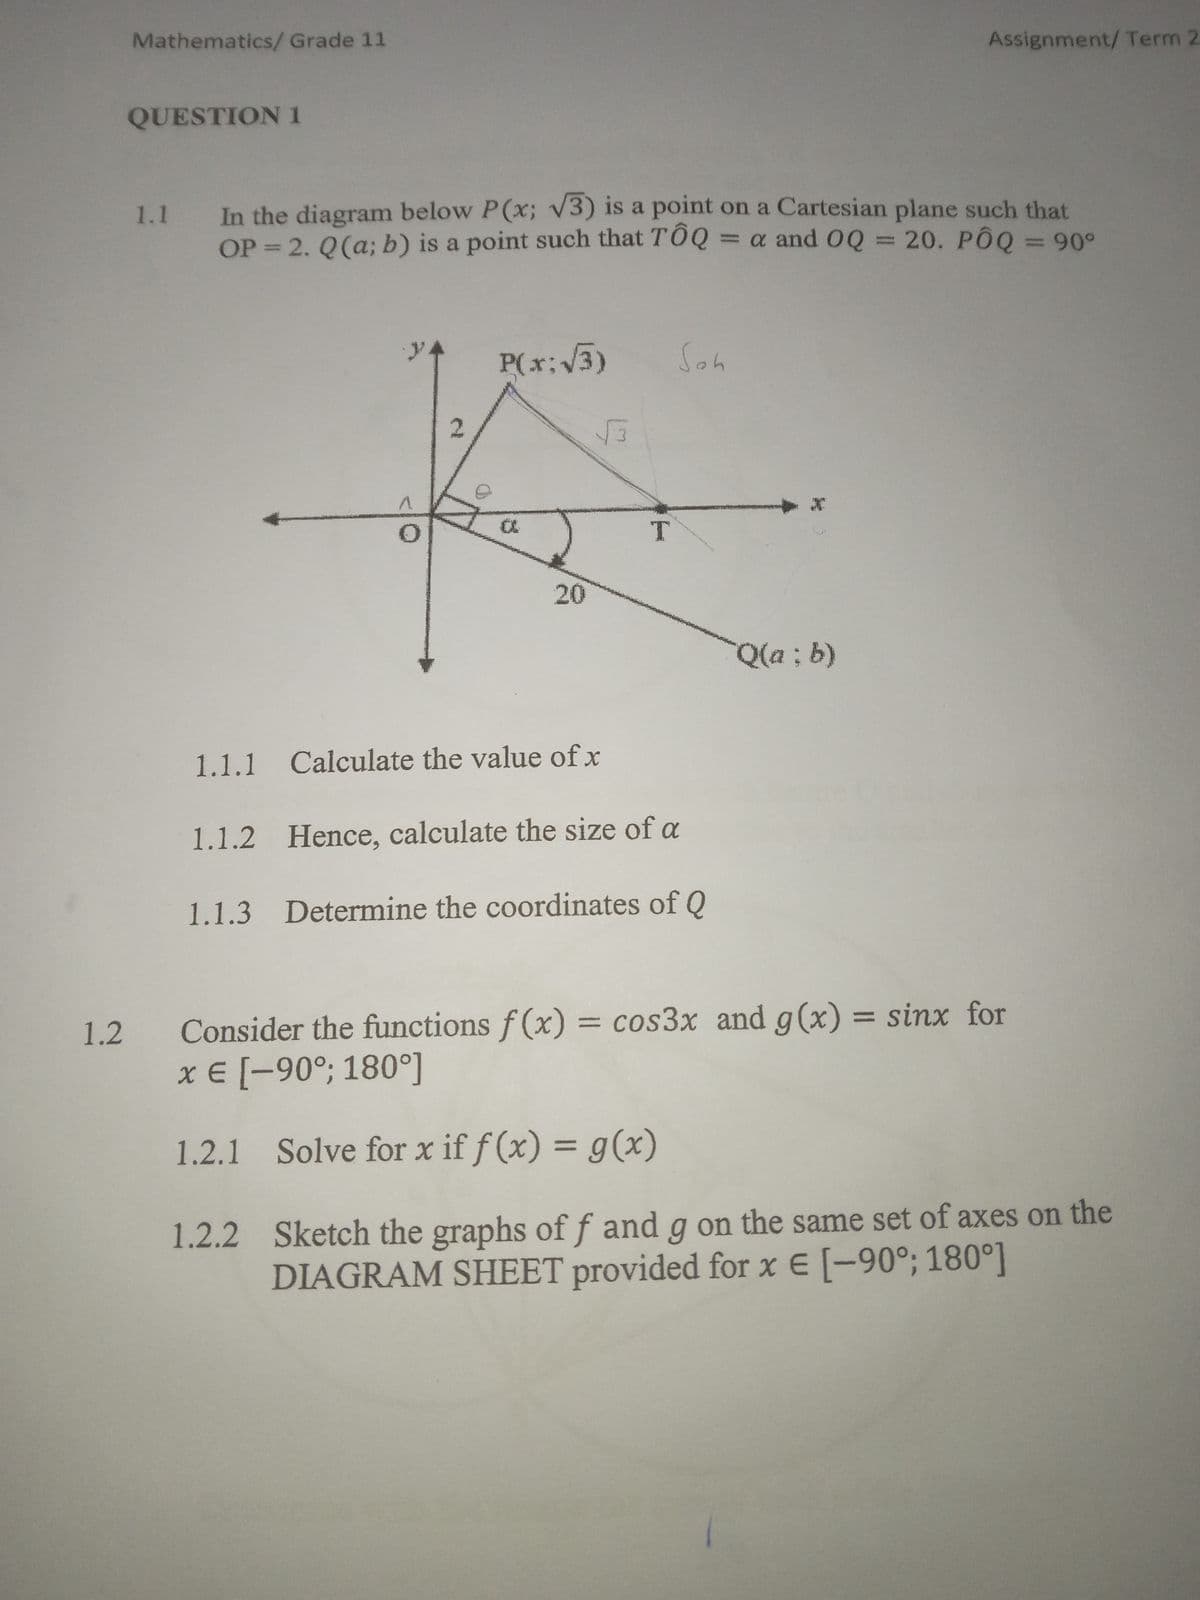 1.2
Mathematics/Grade 11
QUESTION 1
1.1
Assignment/Term 2
In the diagram below P(x; √3) is a point on a Cartesian plane such that
OP 2. Q(a; b) is a point such that TÔQ = α and OQ = 20. PÔQ = 90°
2
P(x:√√3)
Soh
√3
a
20
T
1.1.1 Calculate the value of x
1.1.2 Hence, calculate the size of a
1.1.3 Determine the coordinates of Q
Q(a; b)
Consider the functions f(x) = cos3x and g(x) = sinx for
x = [-90°; 180°]
1.2.1 Solve for x if f(x) = g(x)
1.2.2 Sketch the graphs of ƒ and g on the same set of axes on the
DIAGRAM SHEET provided for x = [-90°; 180°]